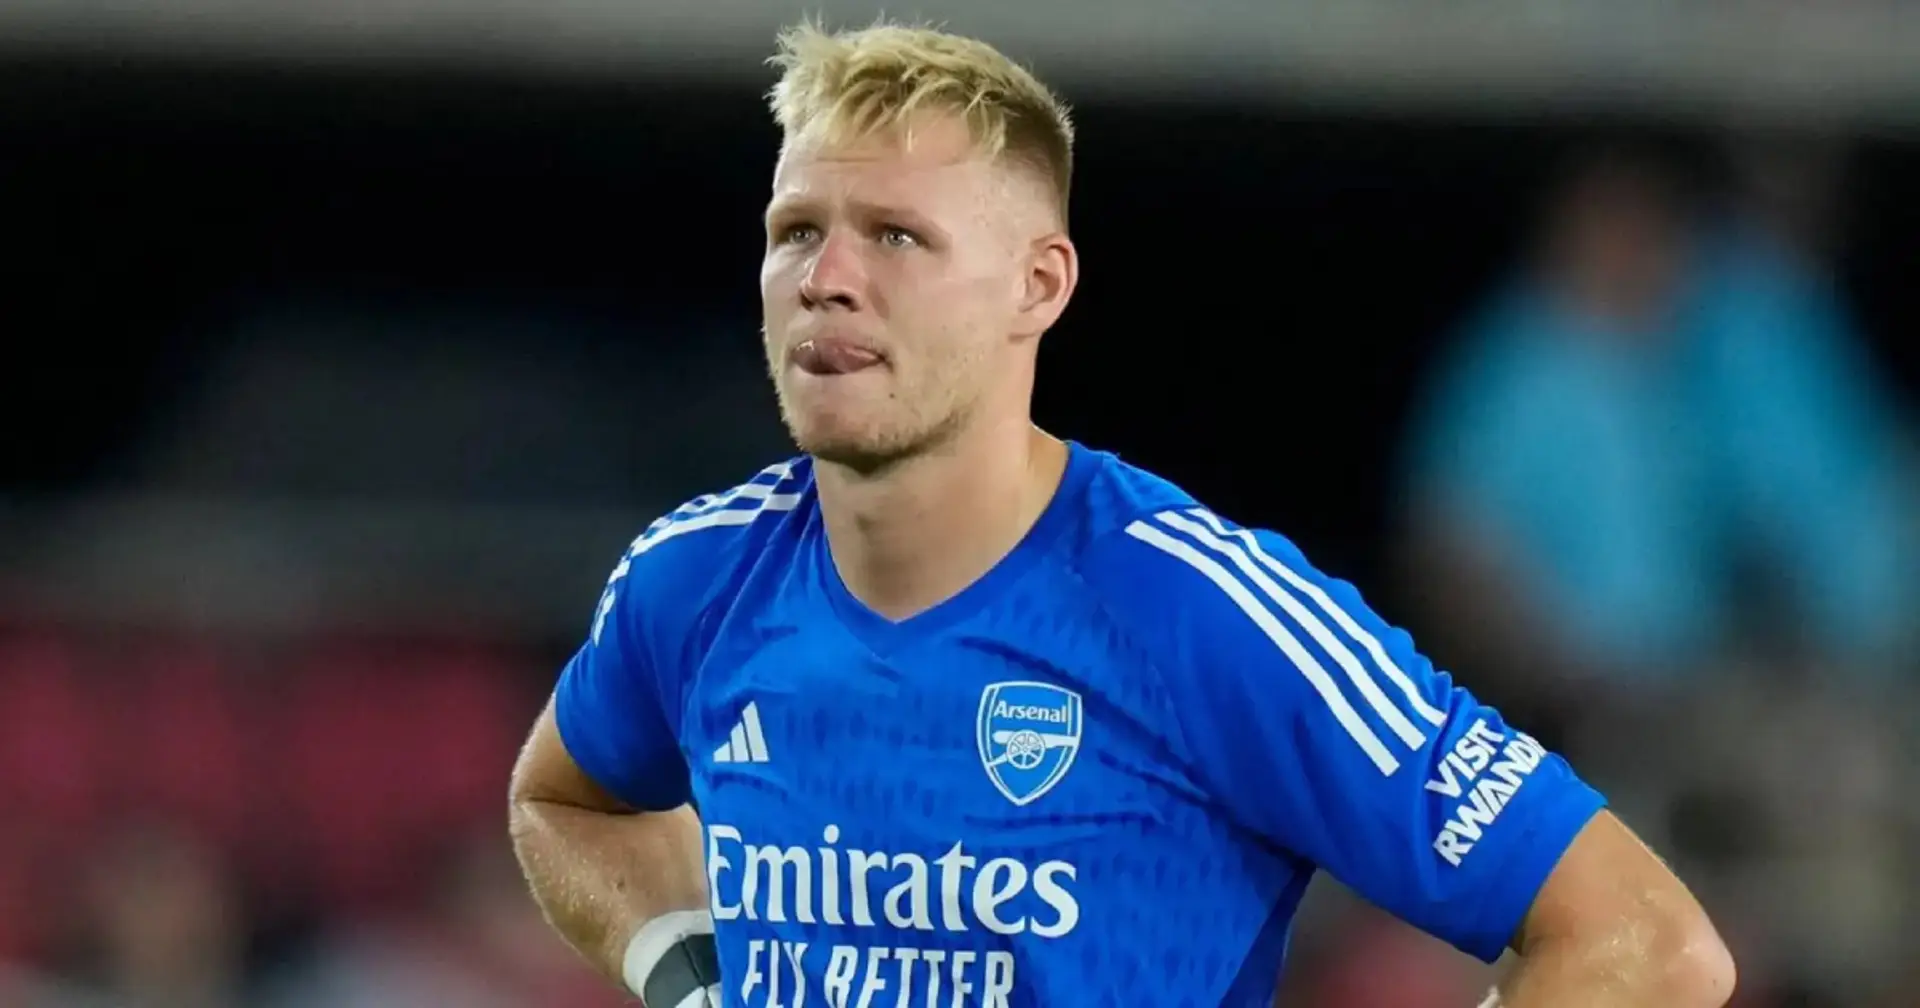 The Athletic: Aaron Ramsdale could leave Arsenal next summer (reliability: 5 stars)